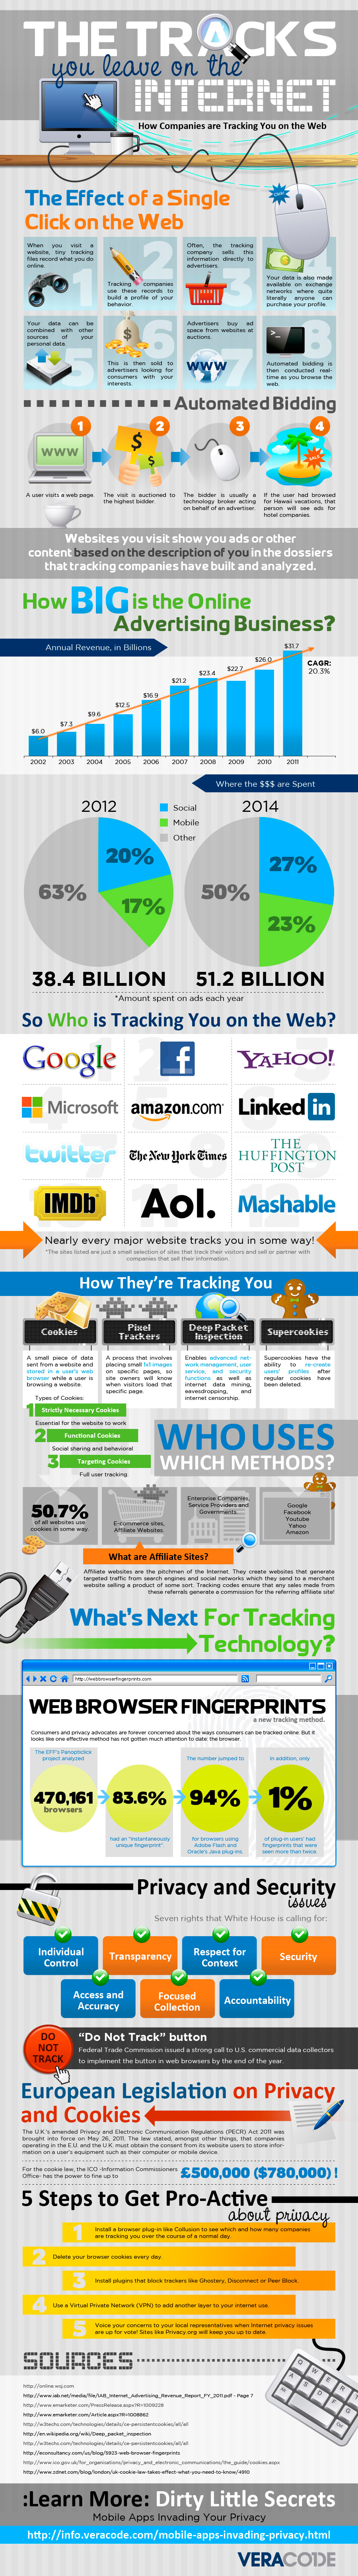  How companies track you on the web